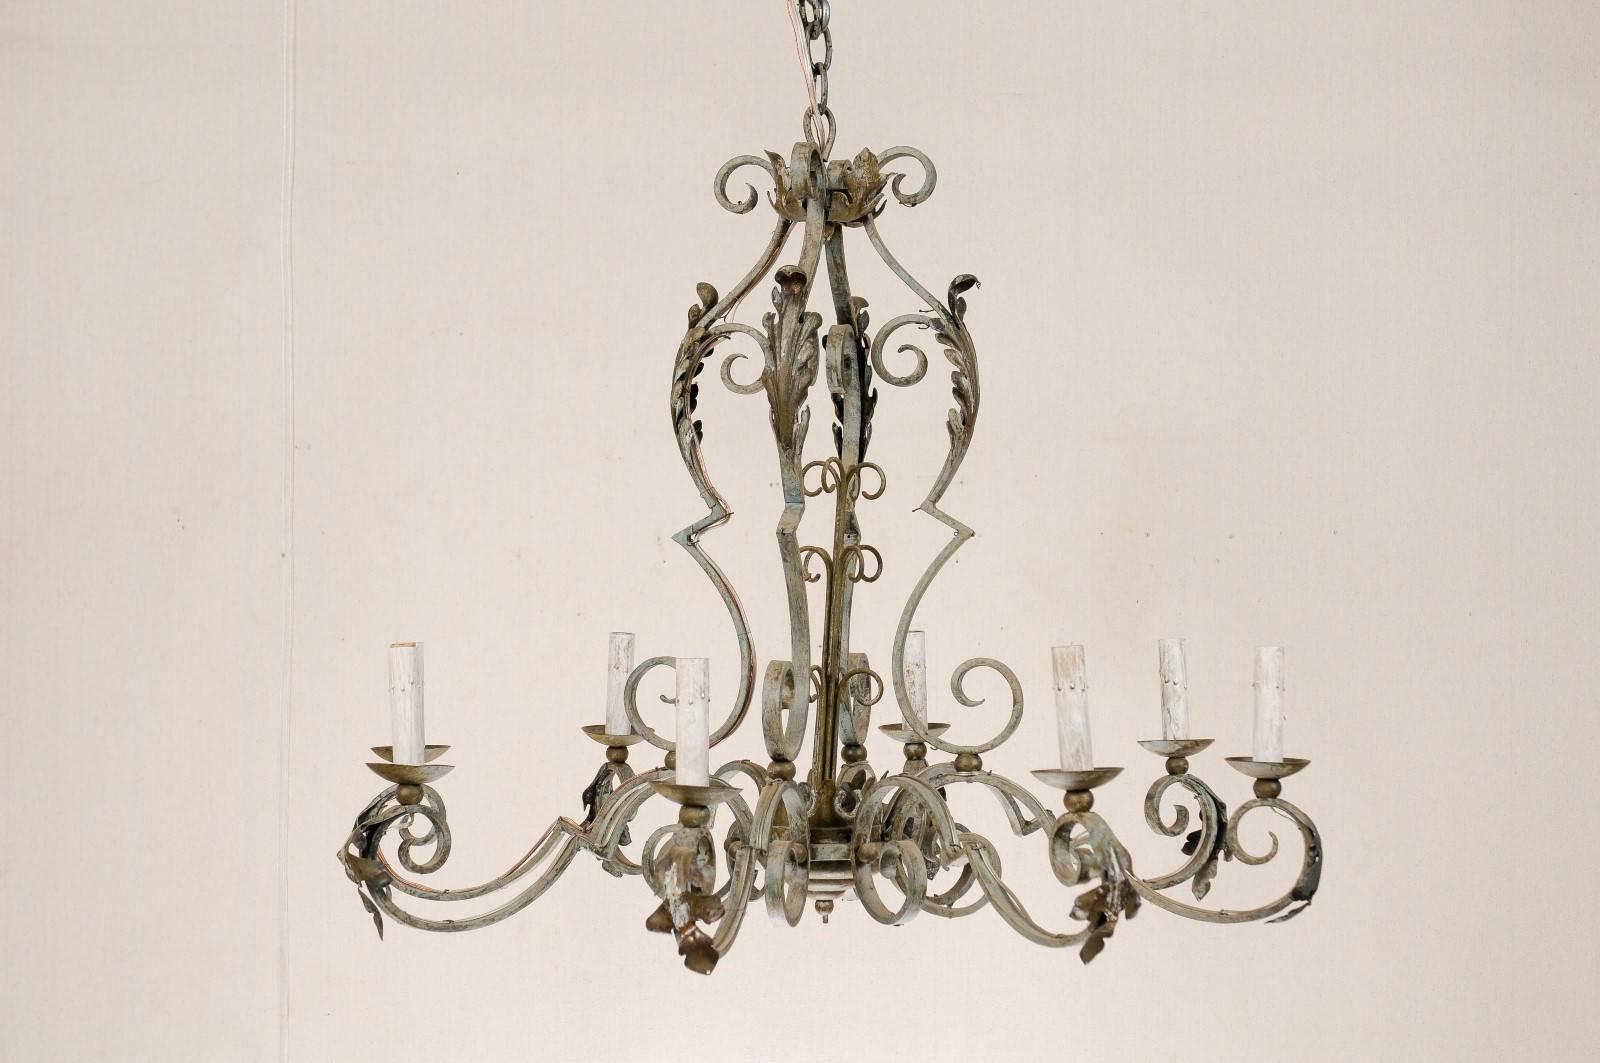 A French painted iron eight-light chandelier. This vintage French chandelier is decorated with scrolls throughout which are adorned with acanthus leaves. This chandelier is from the mid-20th century. This French chandelier has also been rewired for